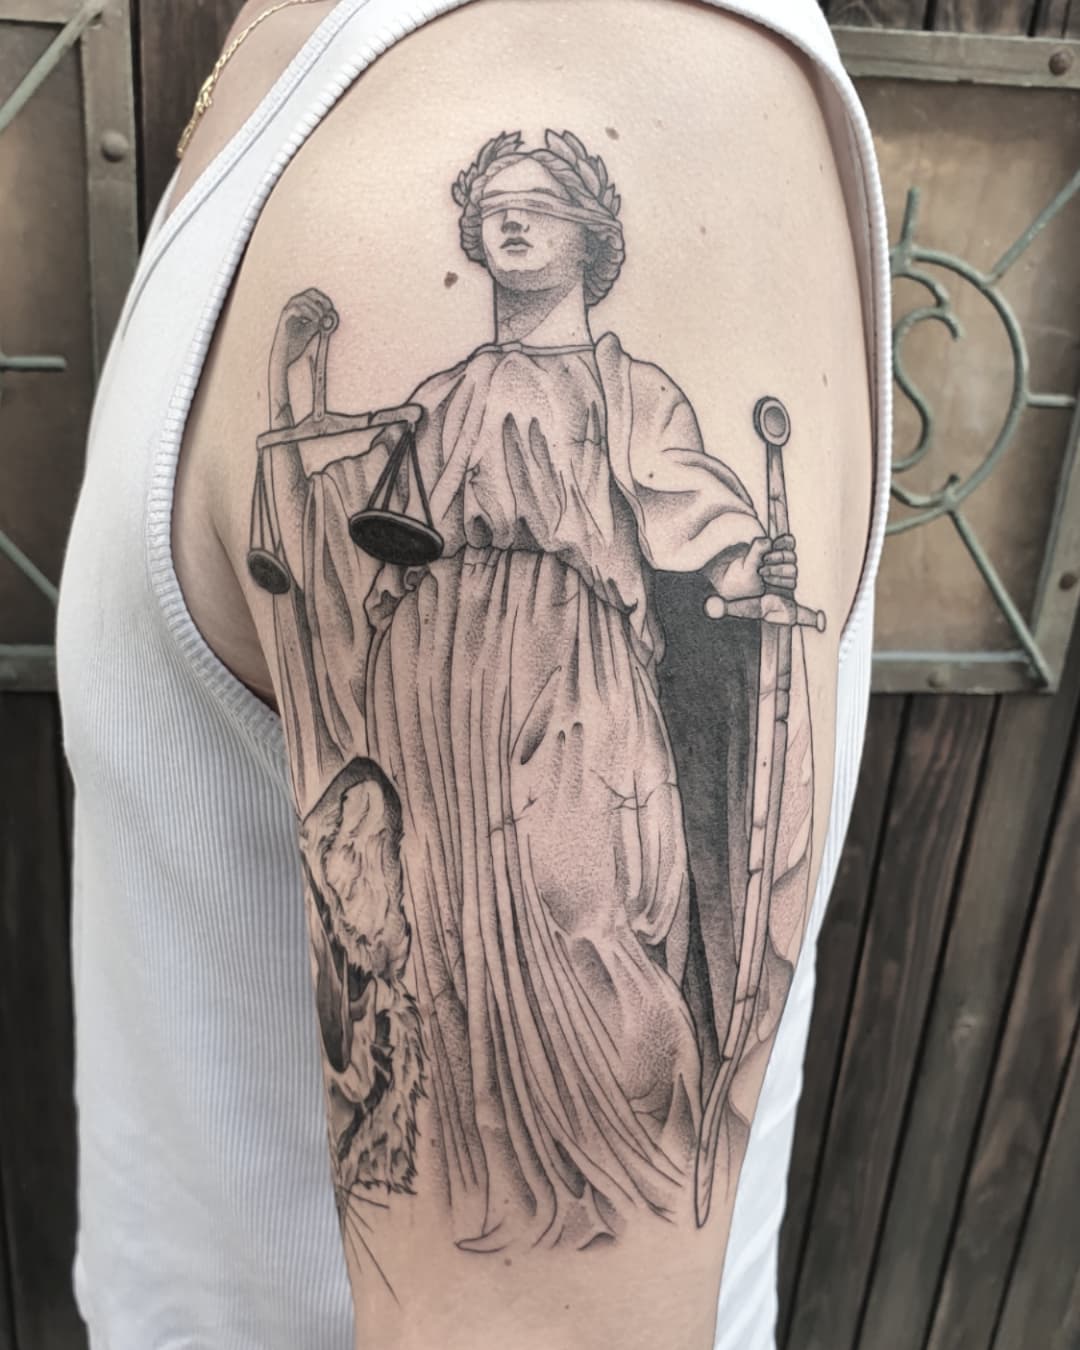 Fun time with this justitia on @norb.27
.
.
.
.
#justitia #blackwork #ink #inked